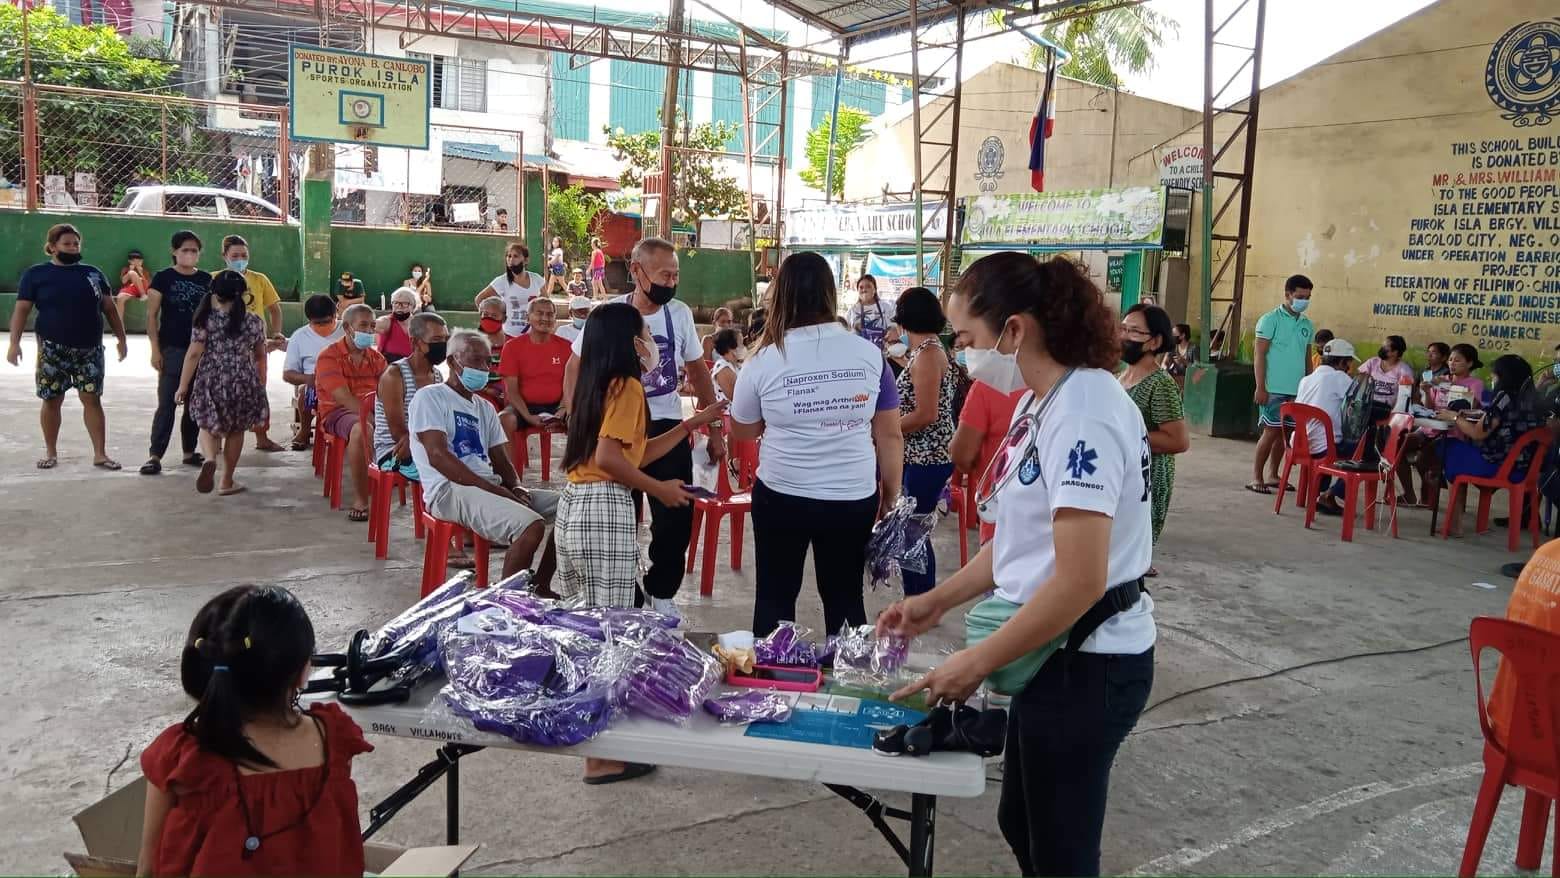 EMR Raptor volunteer together with Flanax conduct medical mission – Mario Eleno Canoy Jr.